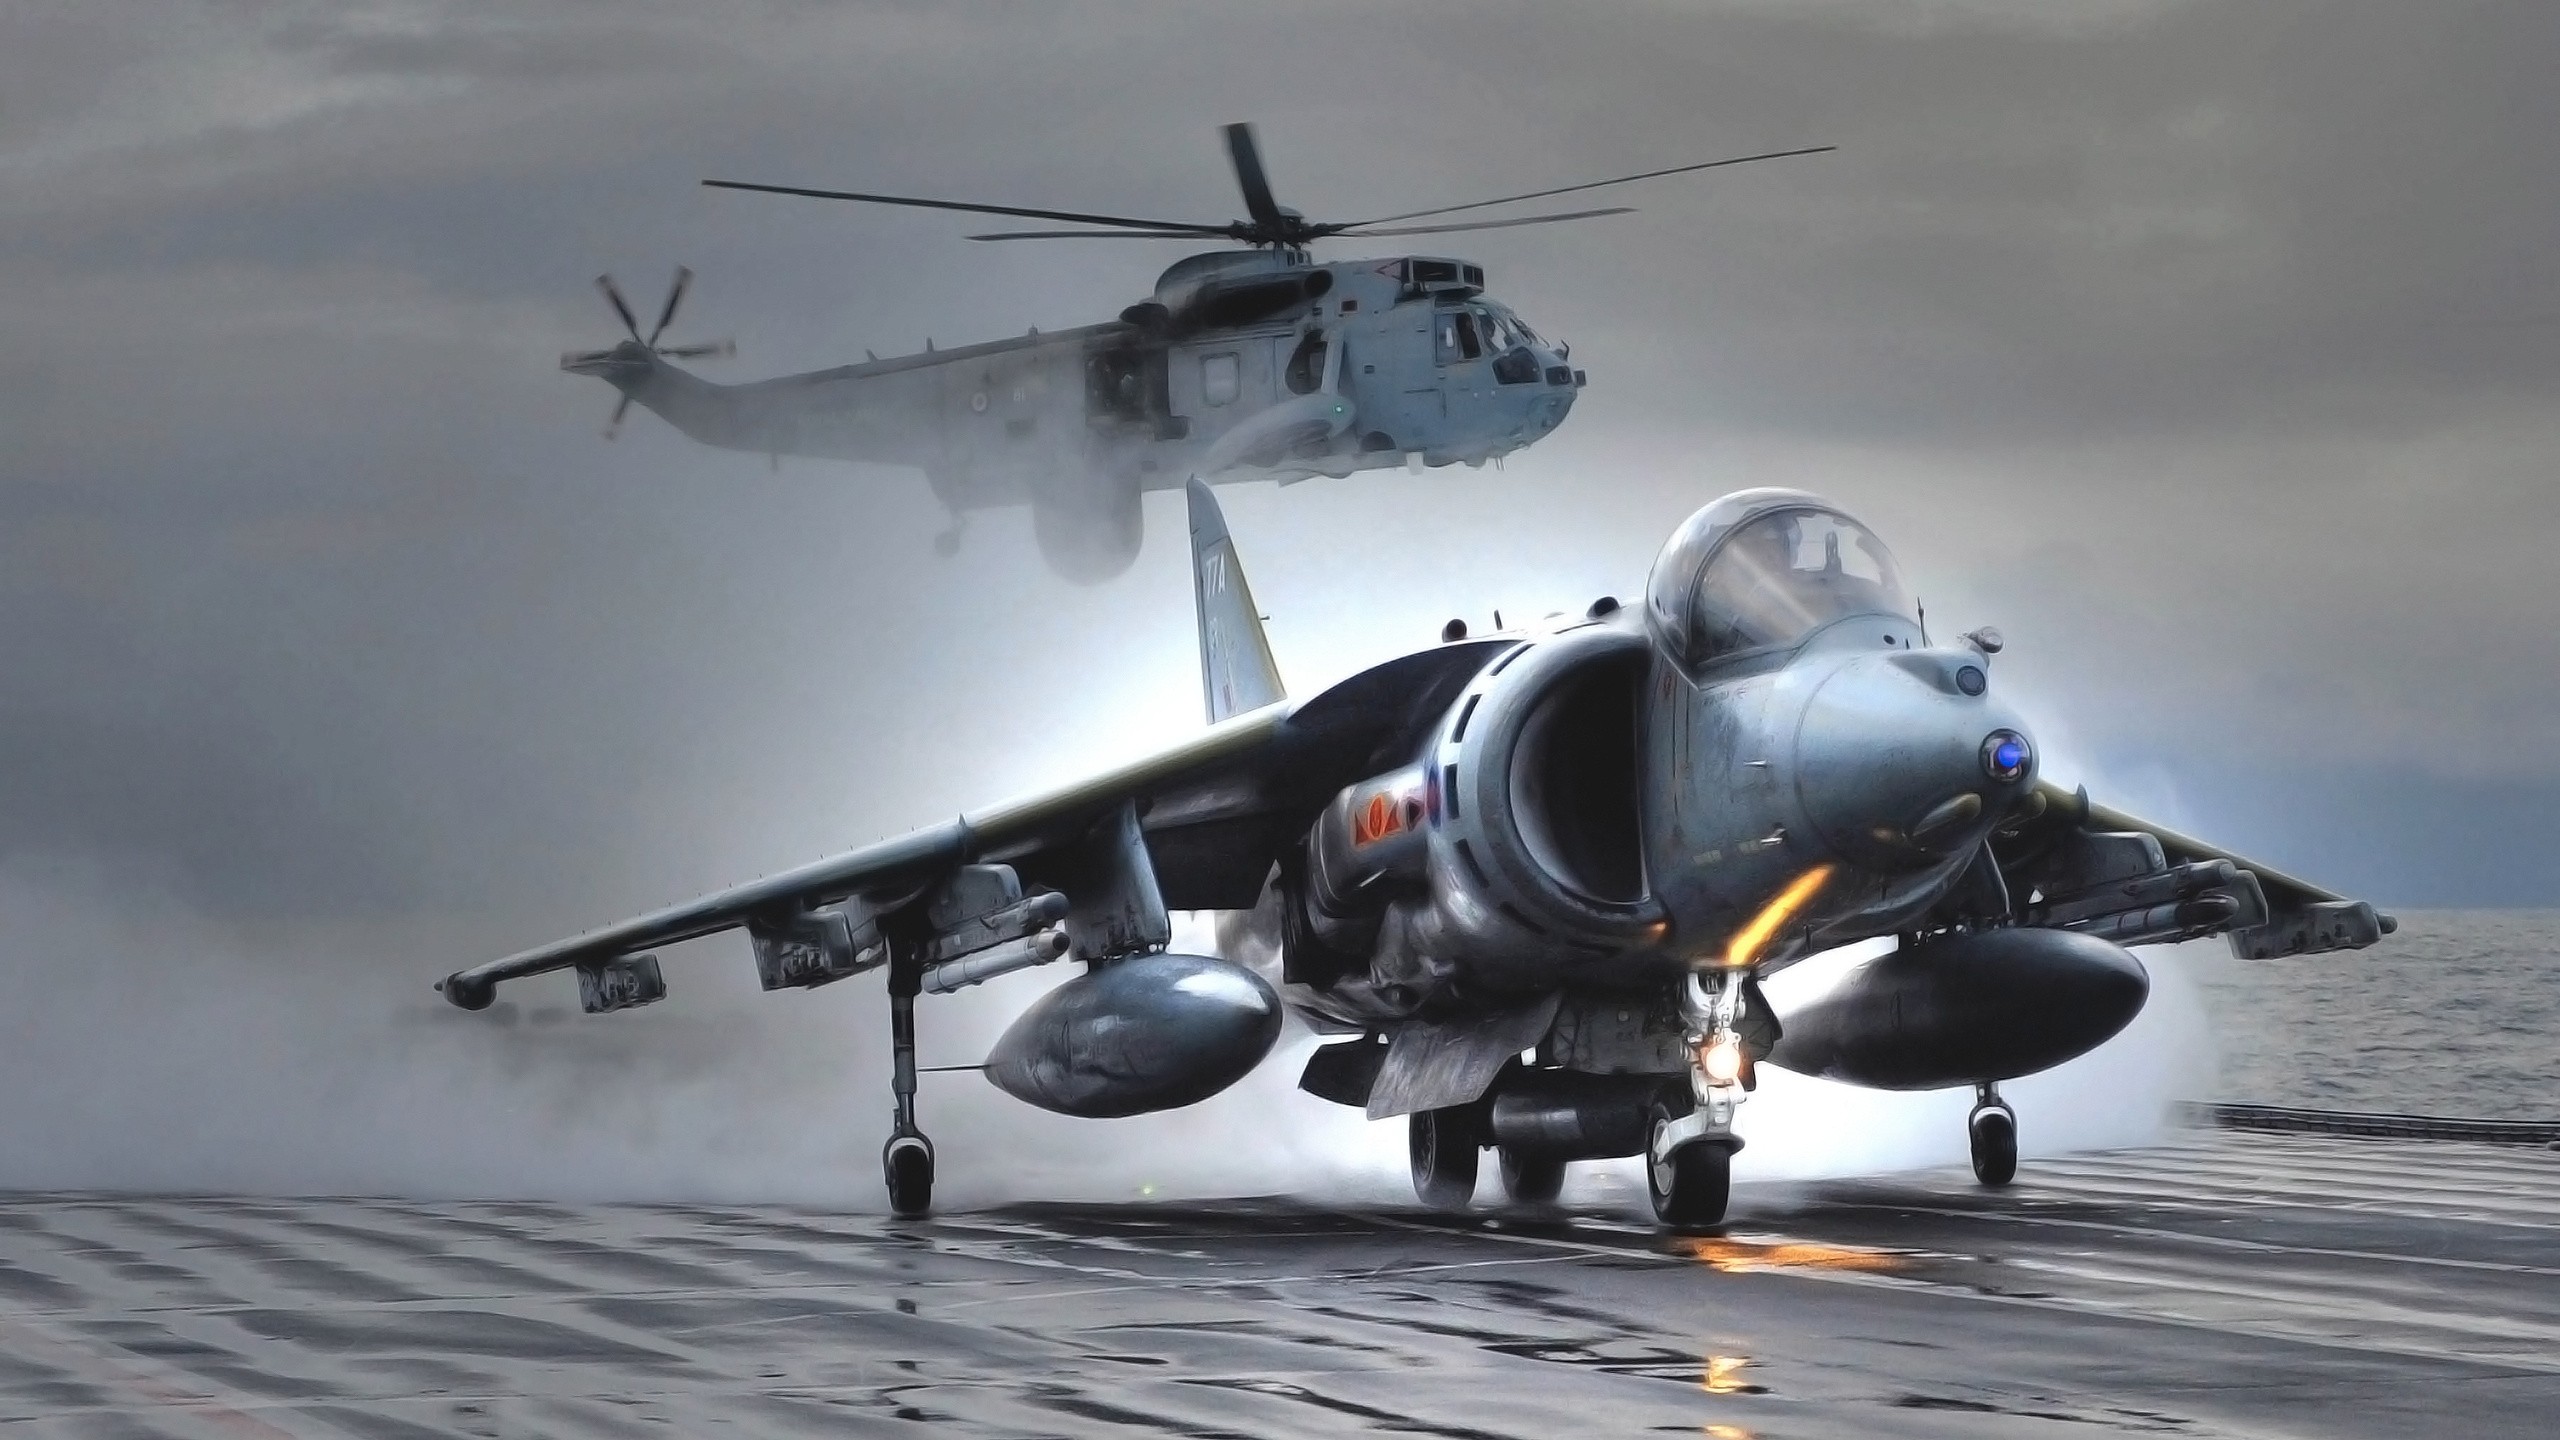 Harrier AV 8B Harrier Ii Royal Navy Military Aircraft Military Aircraft Helicopters 2560x1440